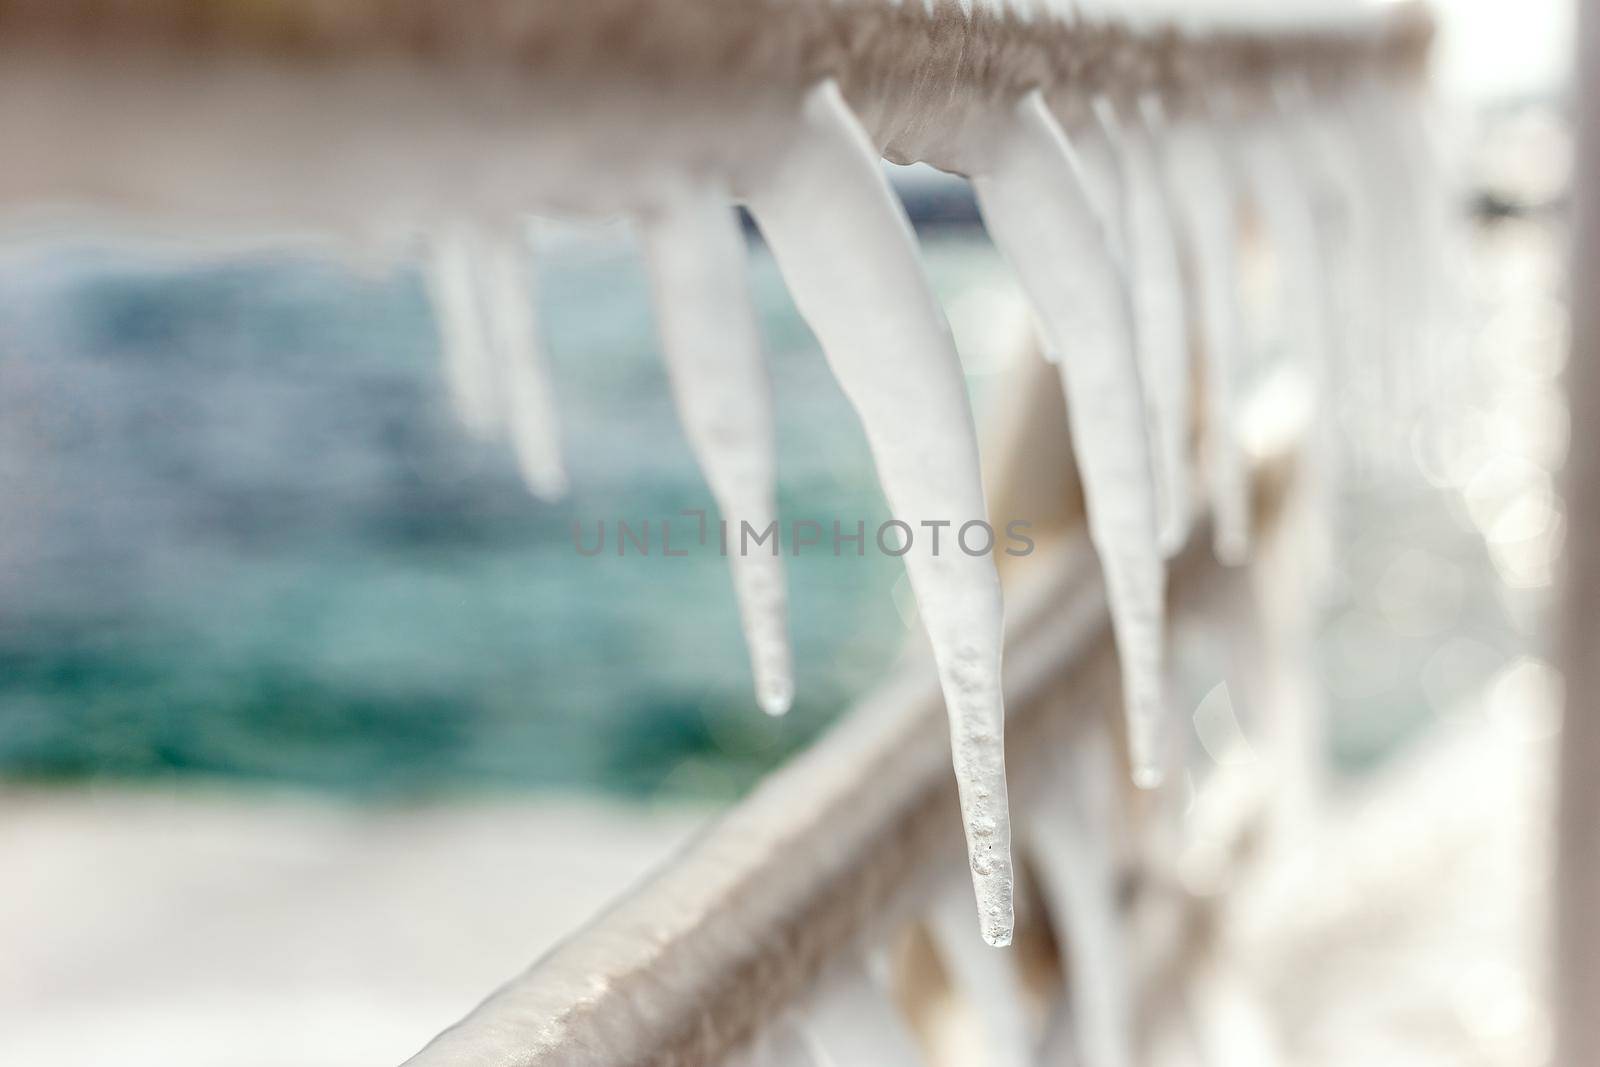 Frozen jetty with icicles on the handrails by Syvanych